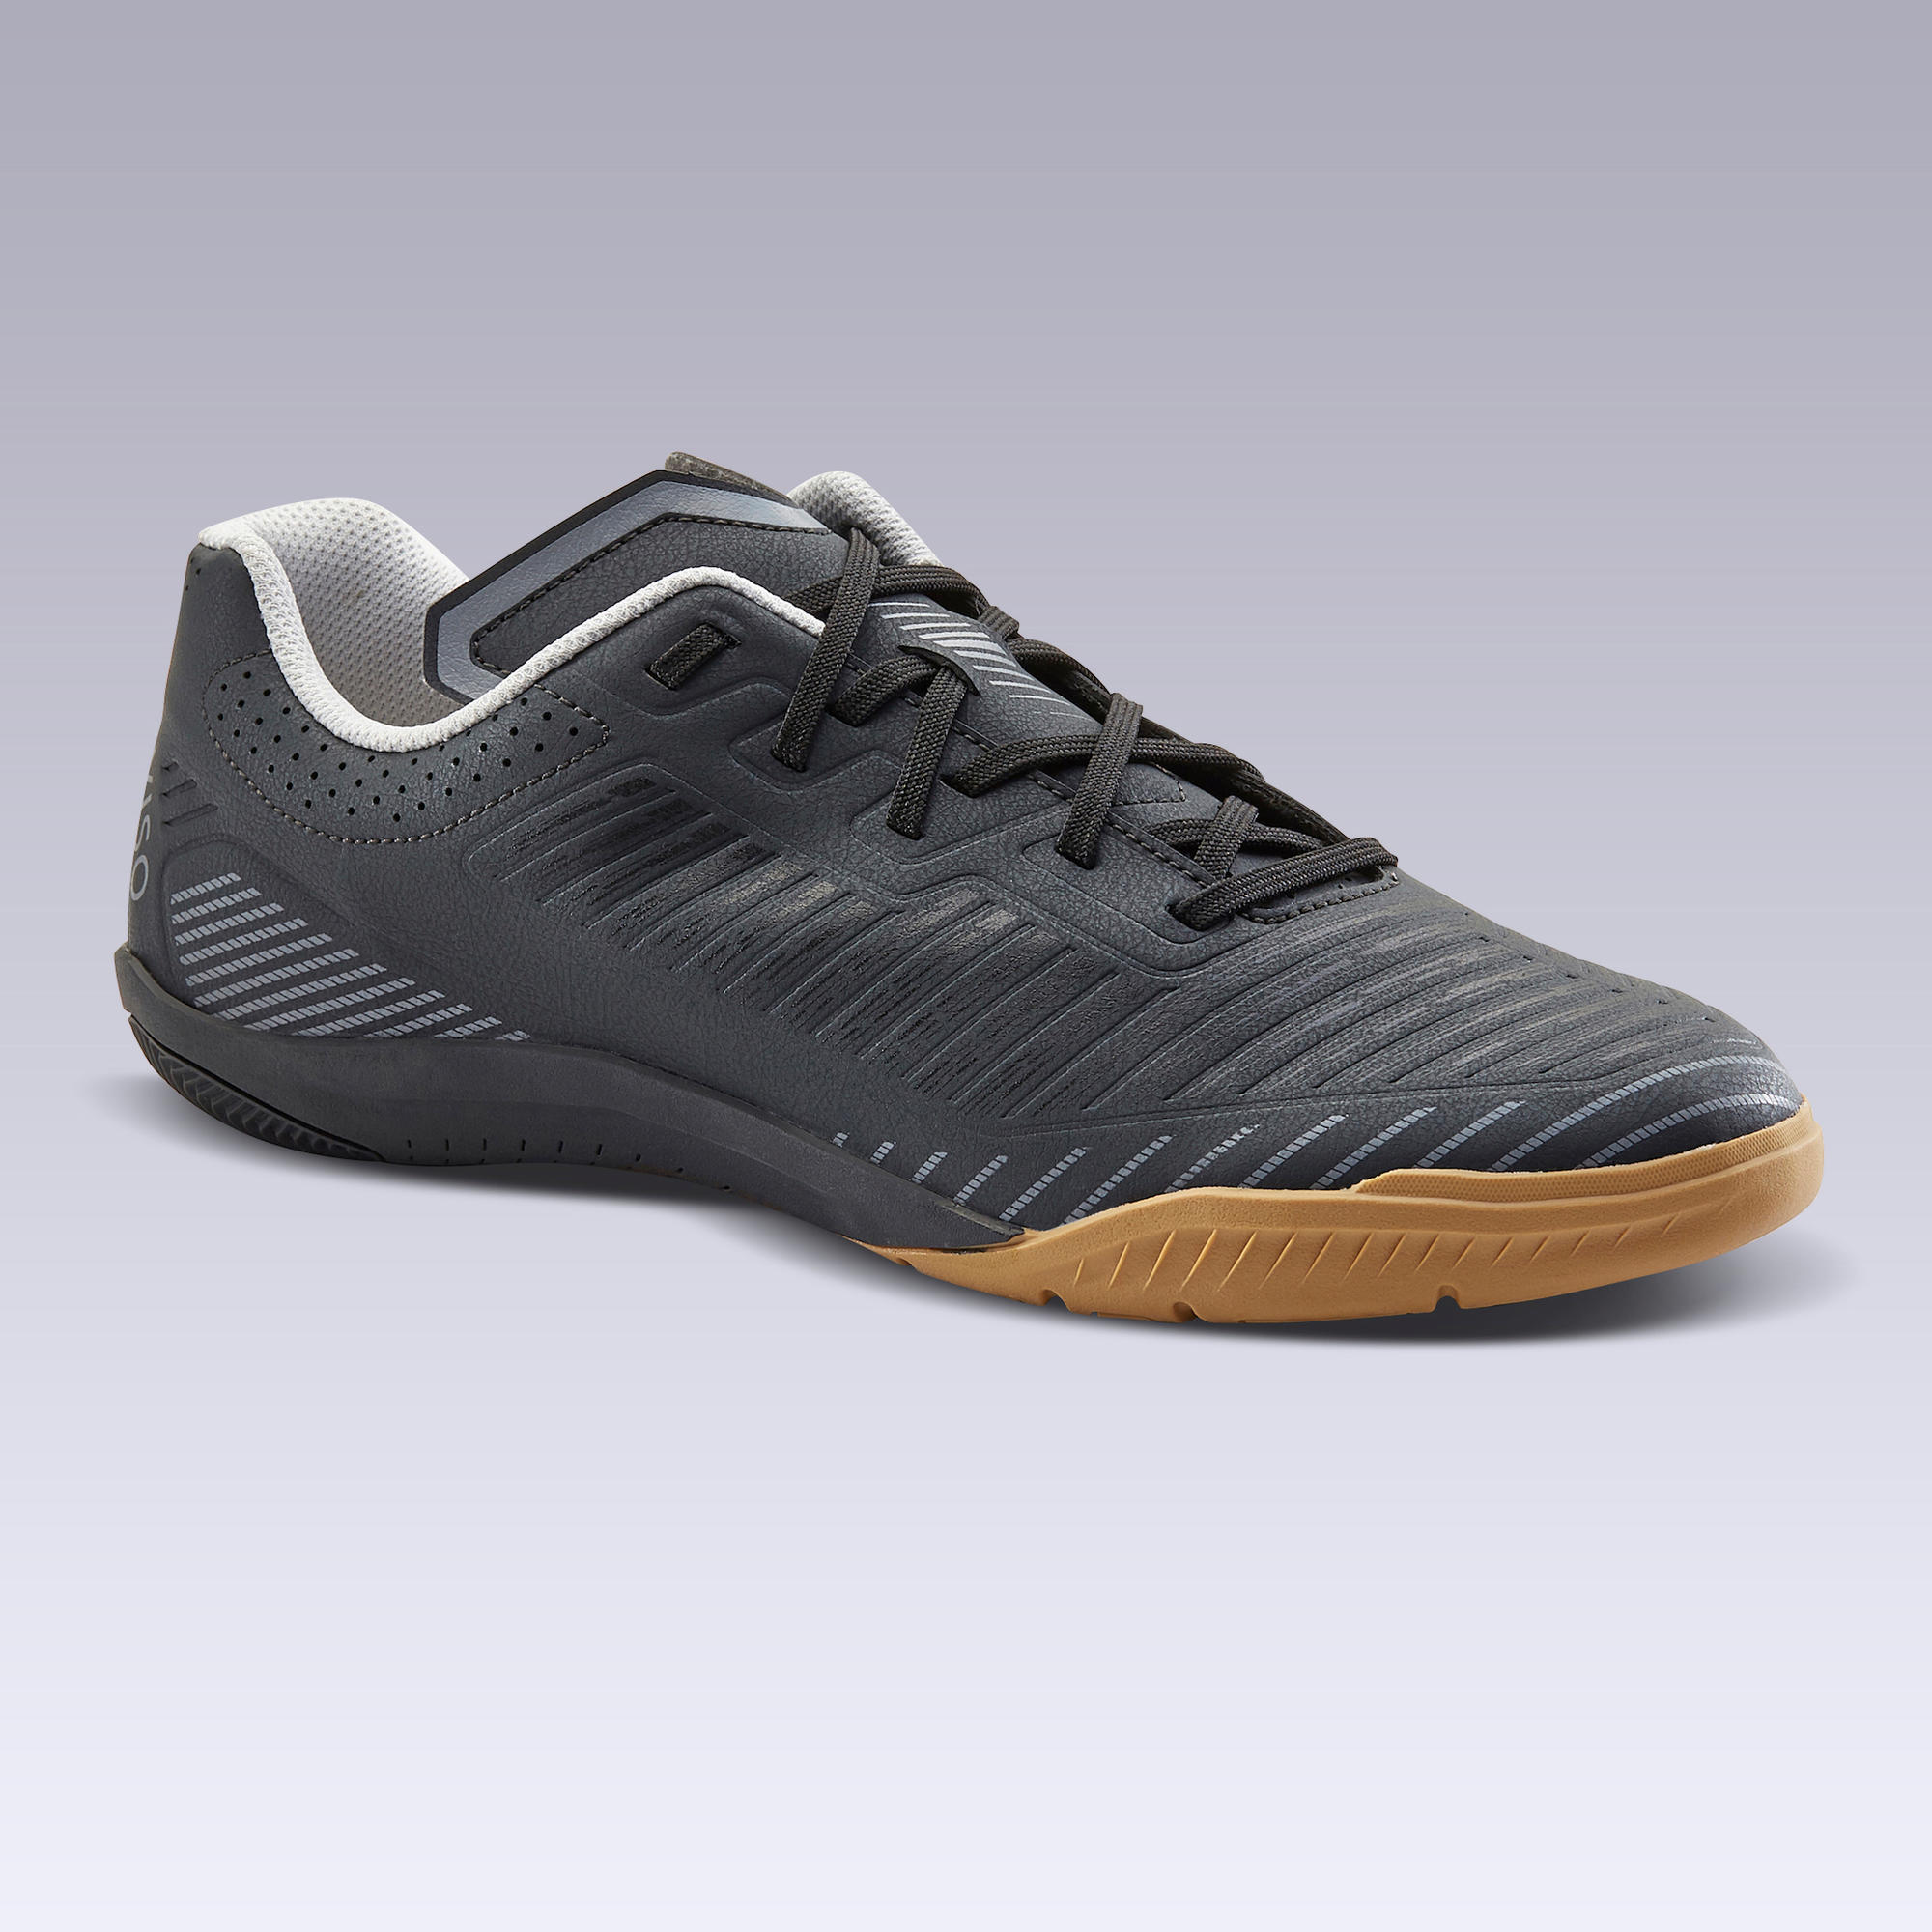 futsal shoes for boxing